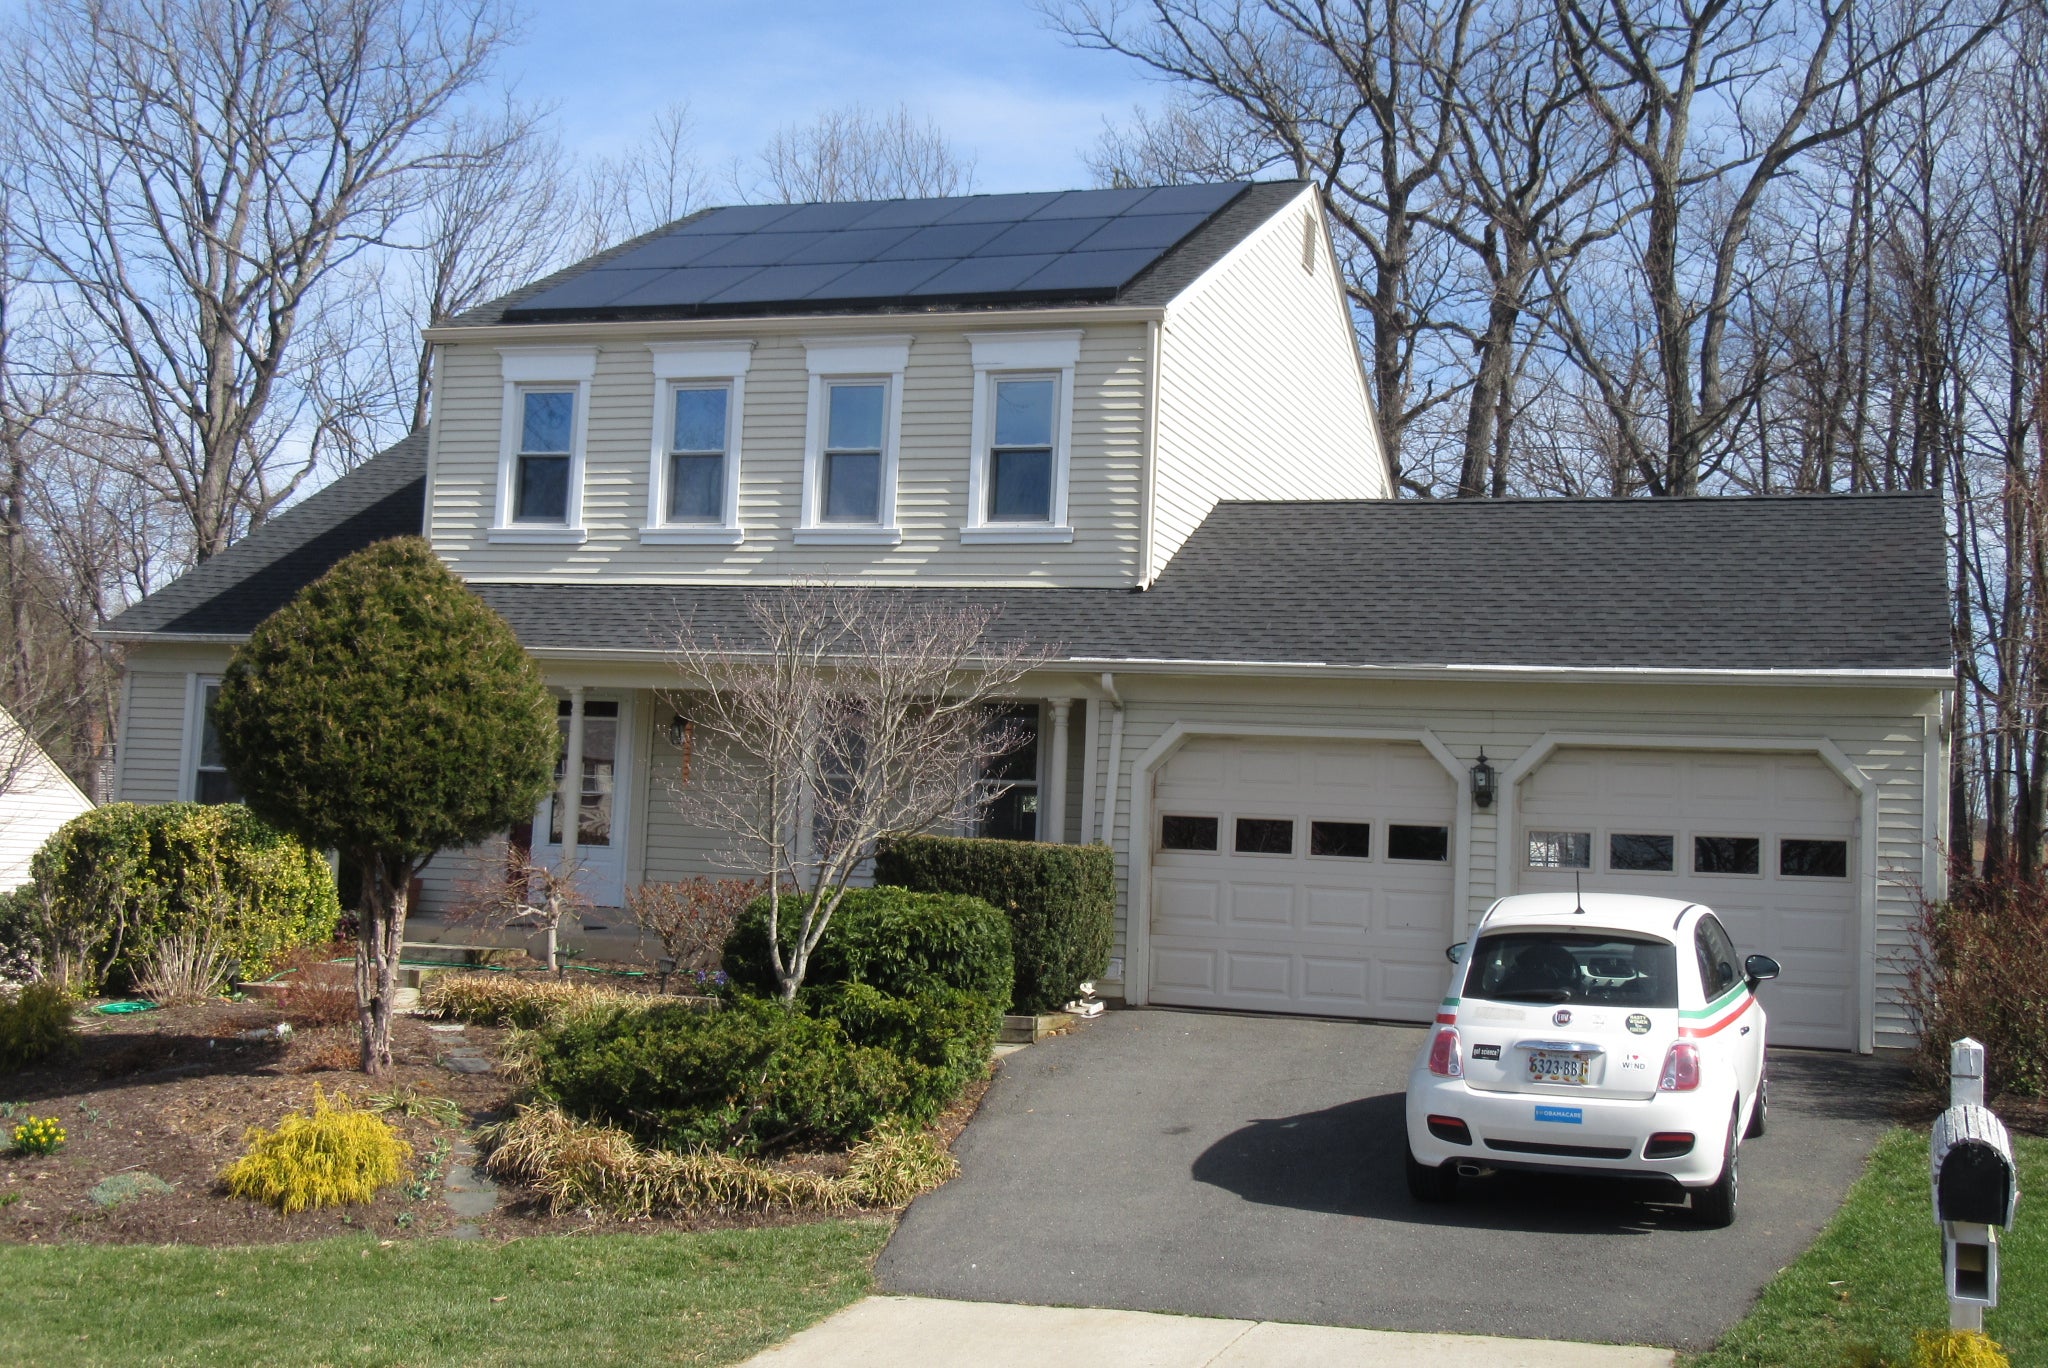 Renovated home with solar